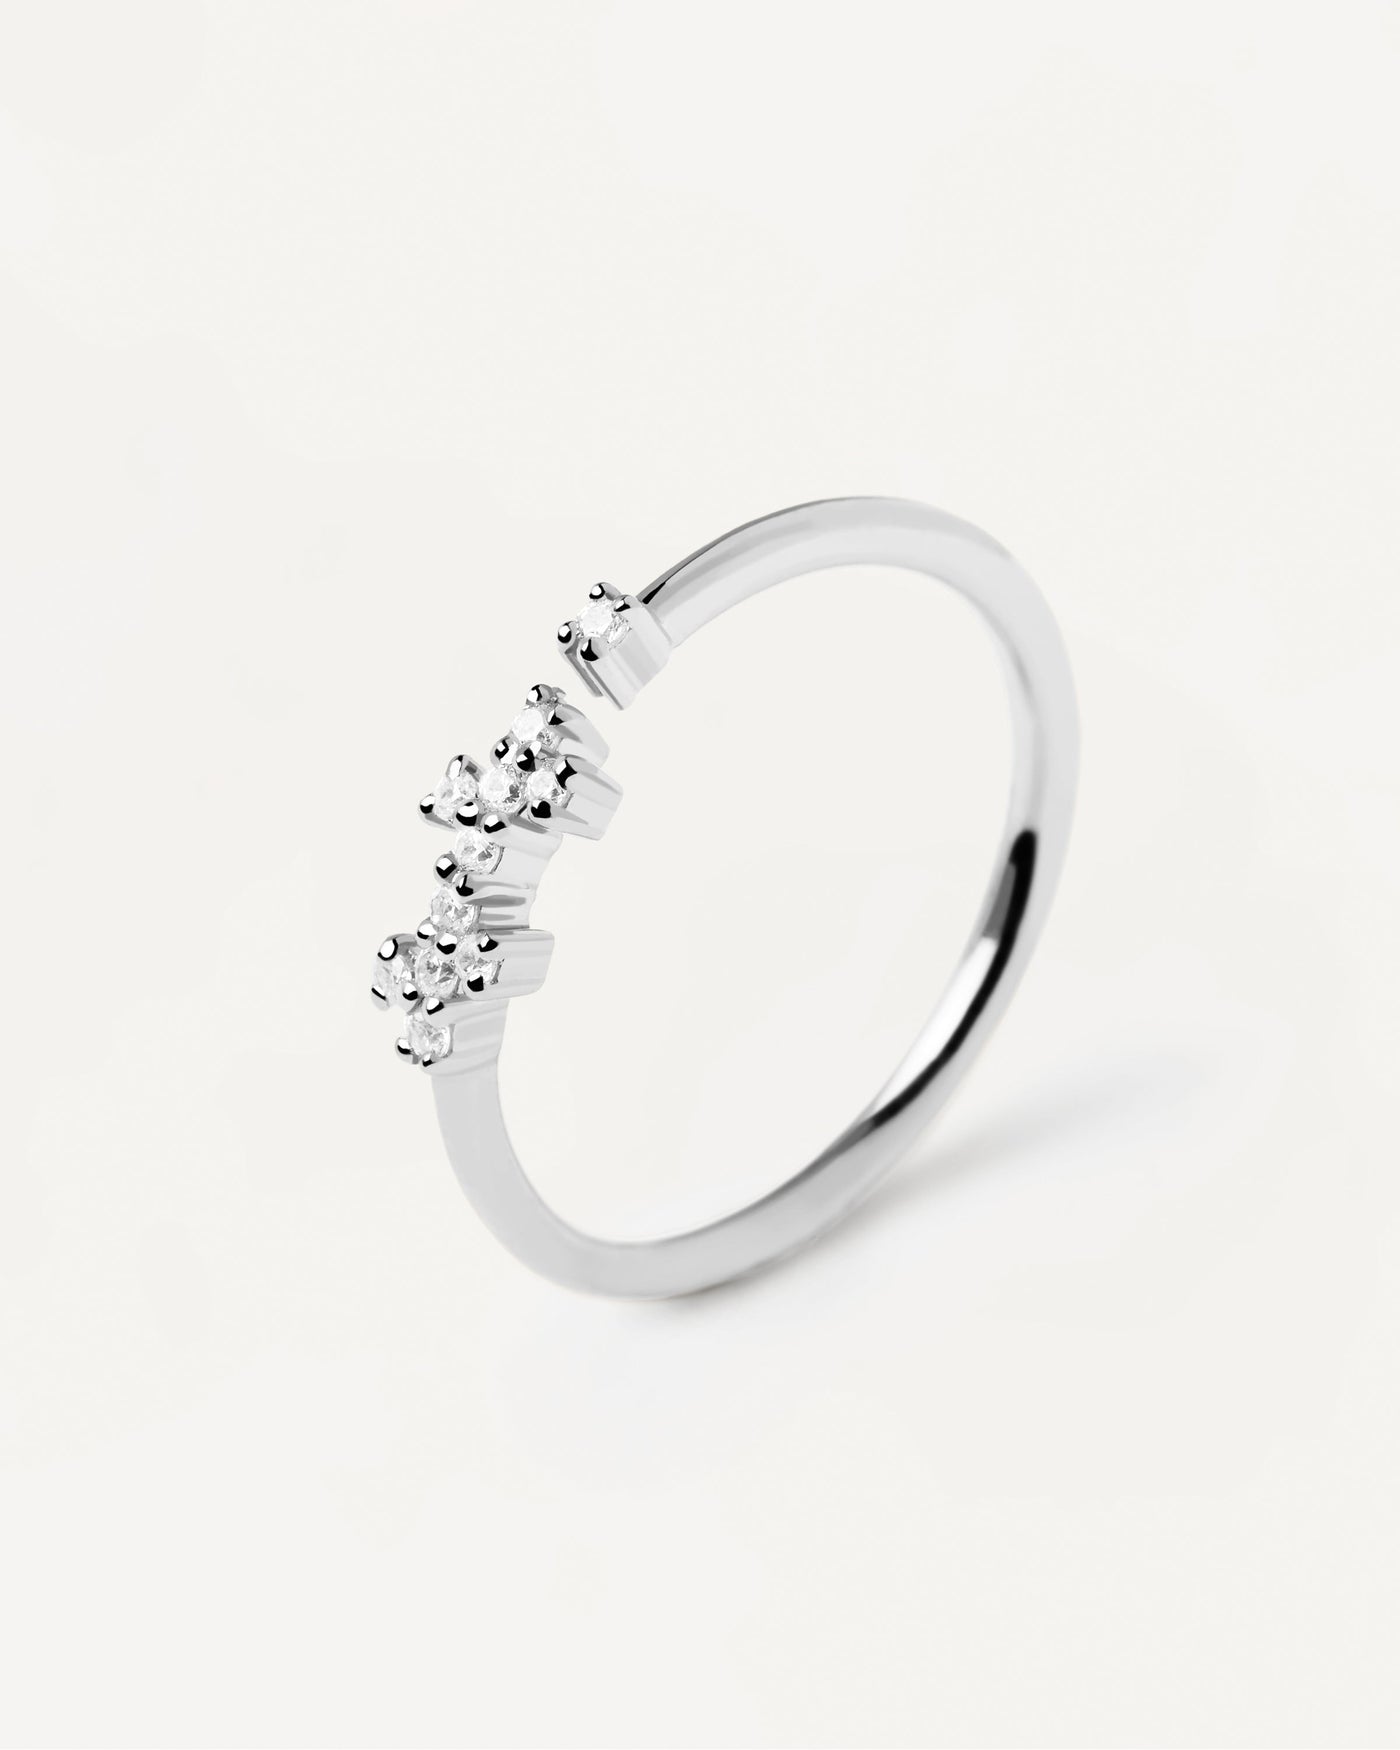 2023 Selection | Prince Silver Ring. Dainty sterling silver ring with white zirconia. Get the latest arrival from PDPAOLA. Place your order safely and get this Best Seller. Free Shipping.